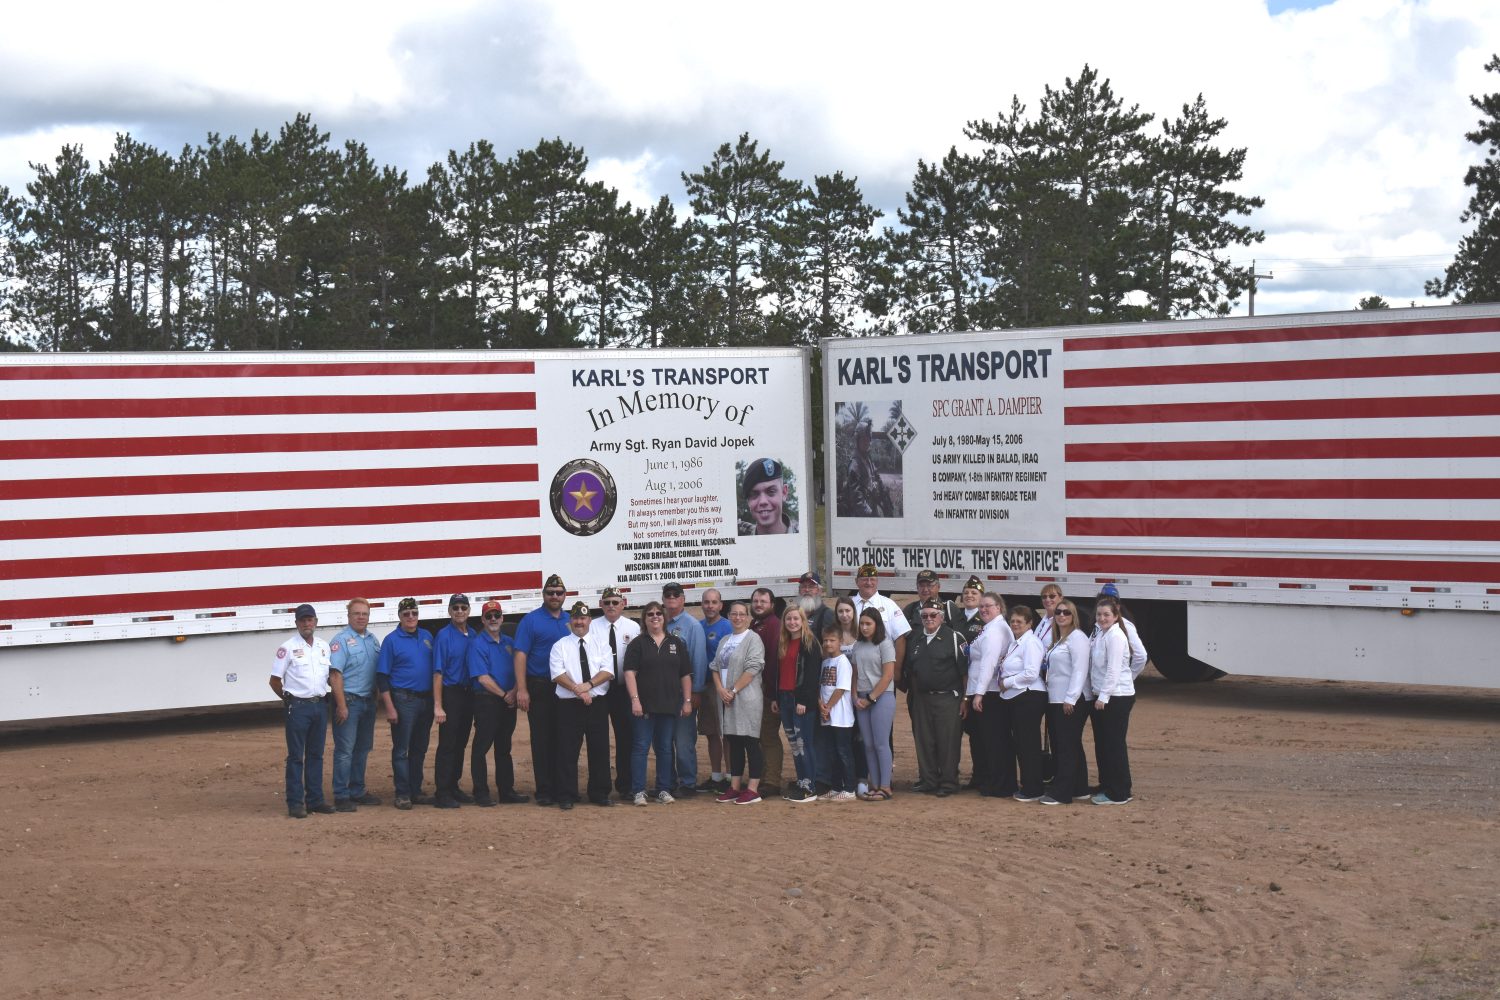 Transport company showcases custom trailers in honor of fallen soldiers